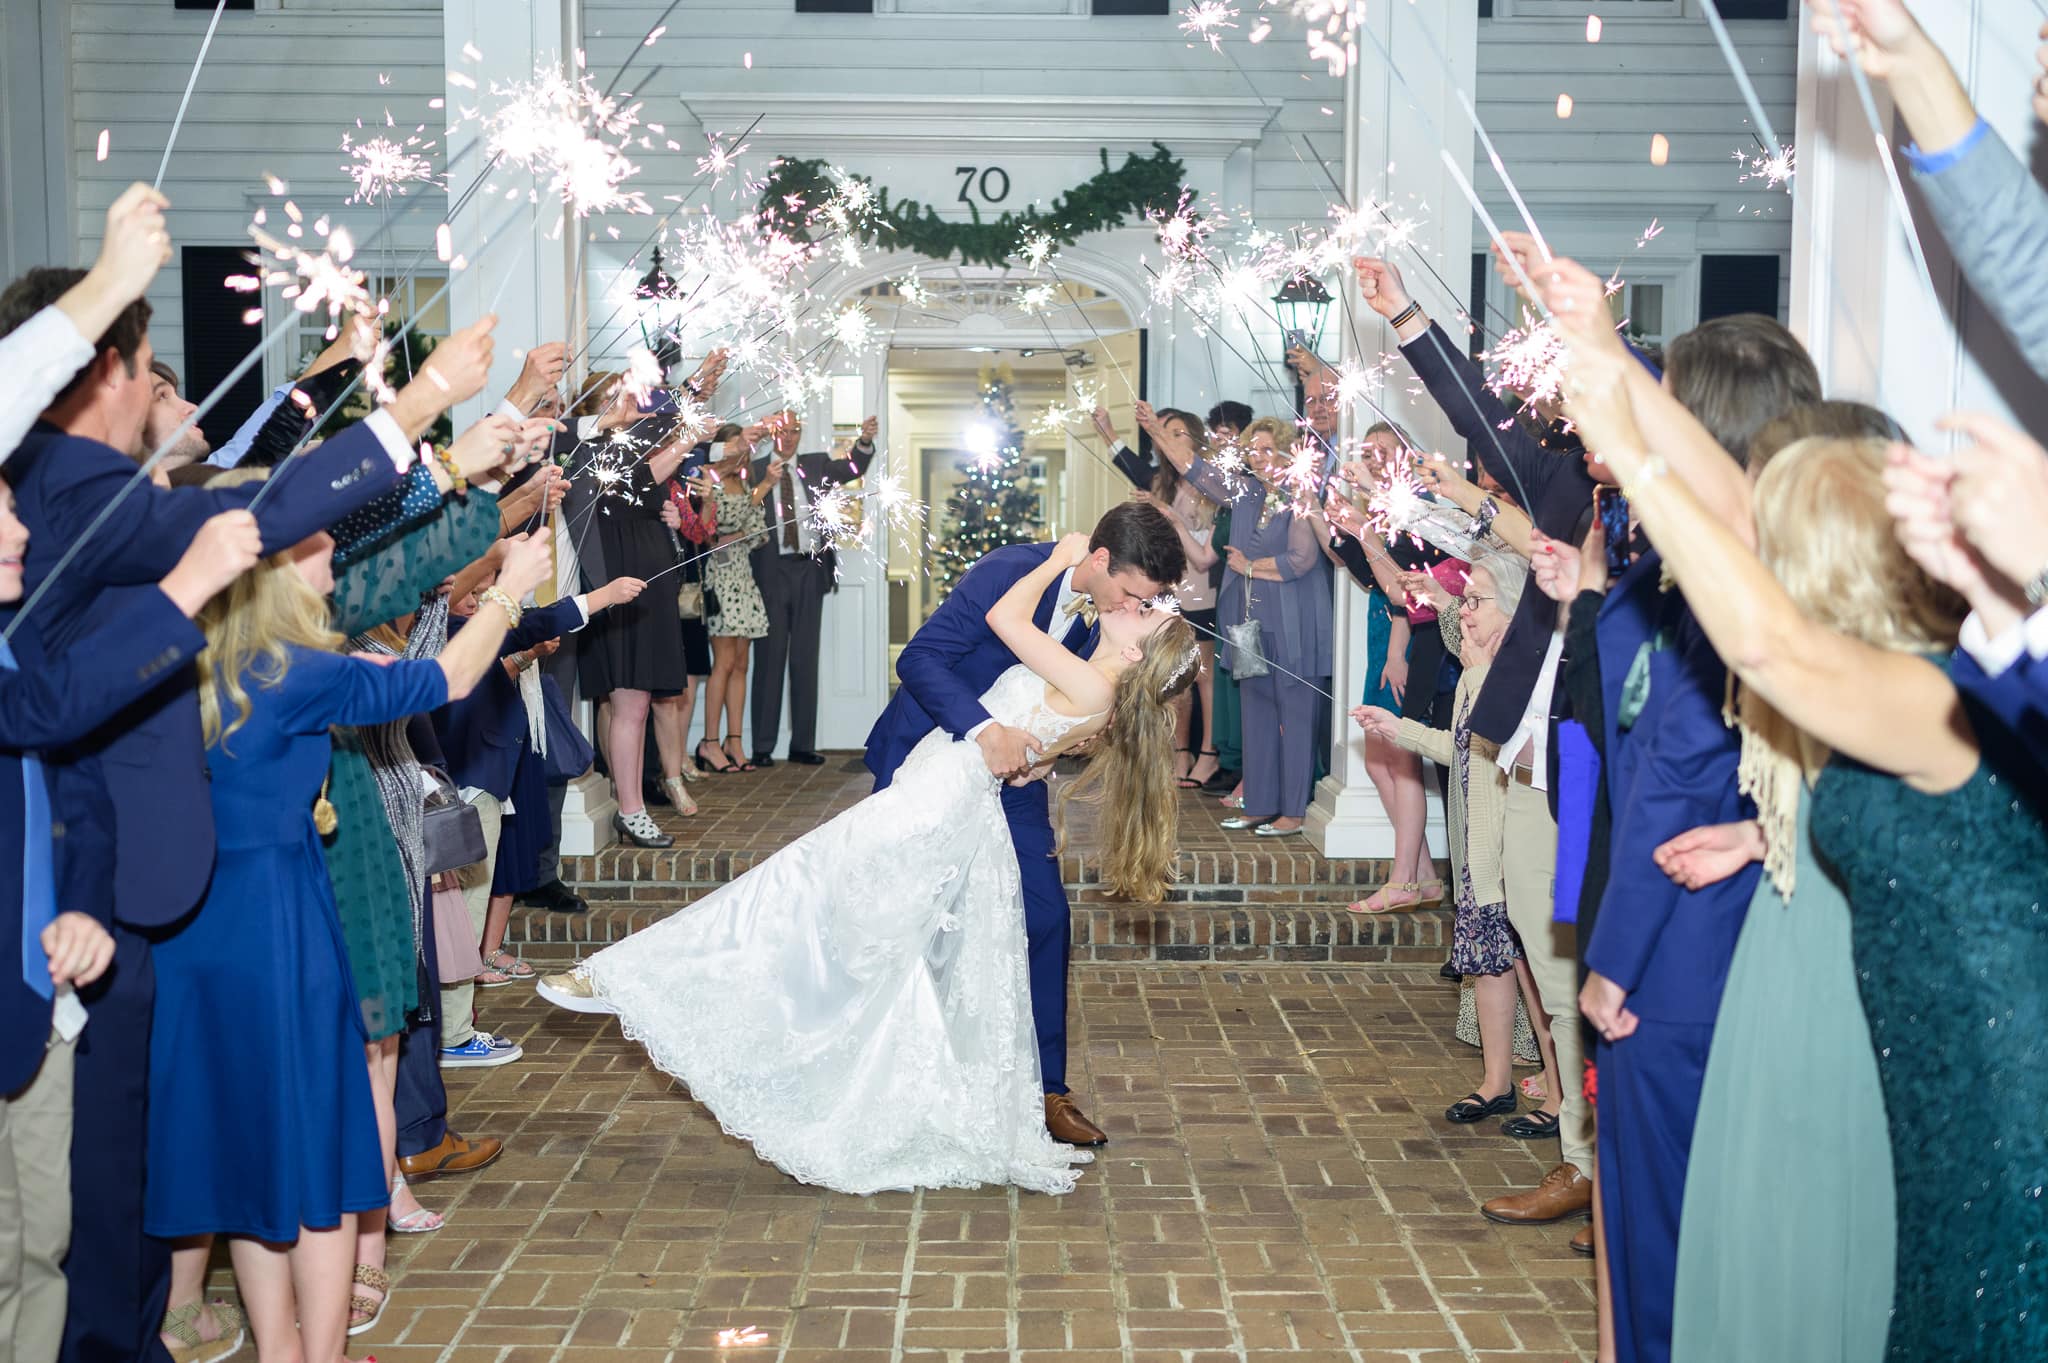 Dip under the sparklers  - Pawleys Plantation Golf & Country Club